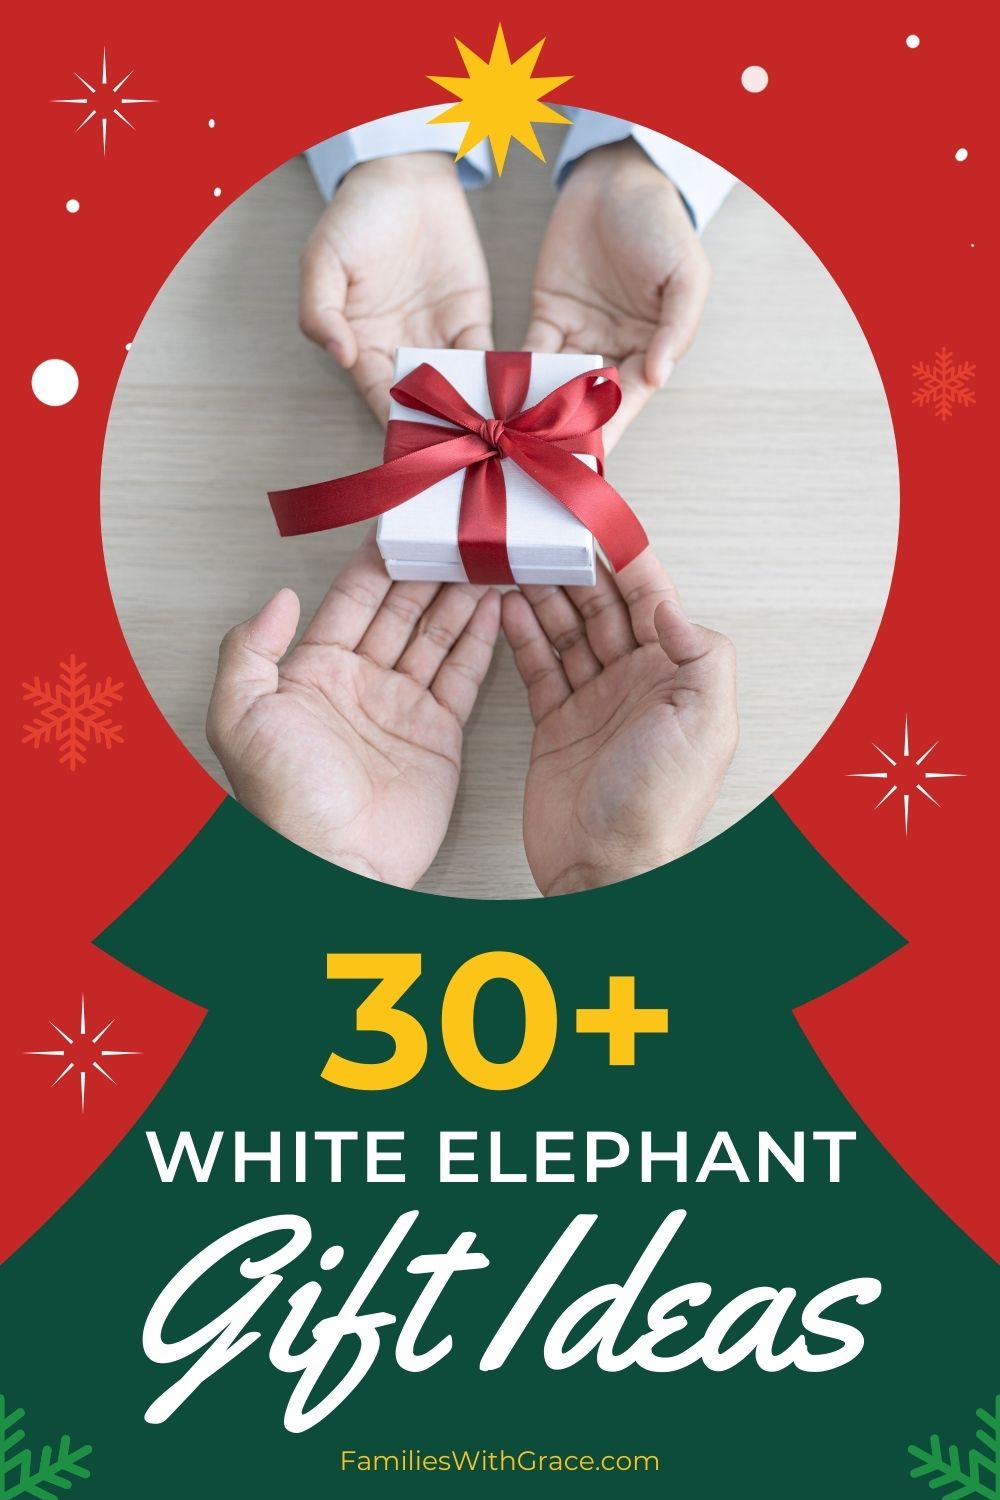 Co-Worker & White Elephant Gift Ideas - A Southern Flare